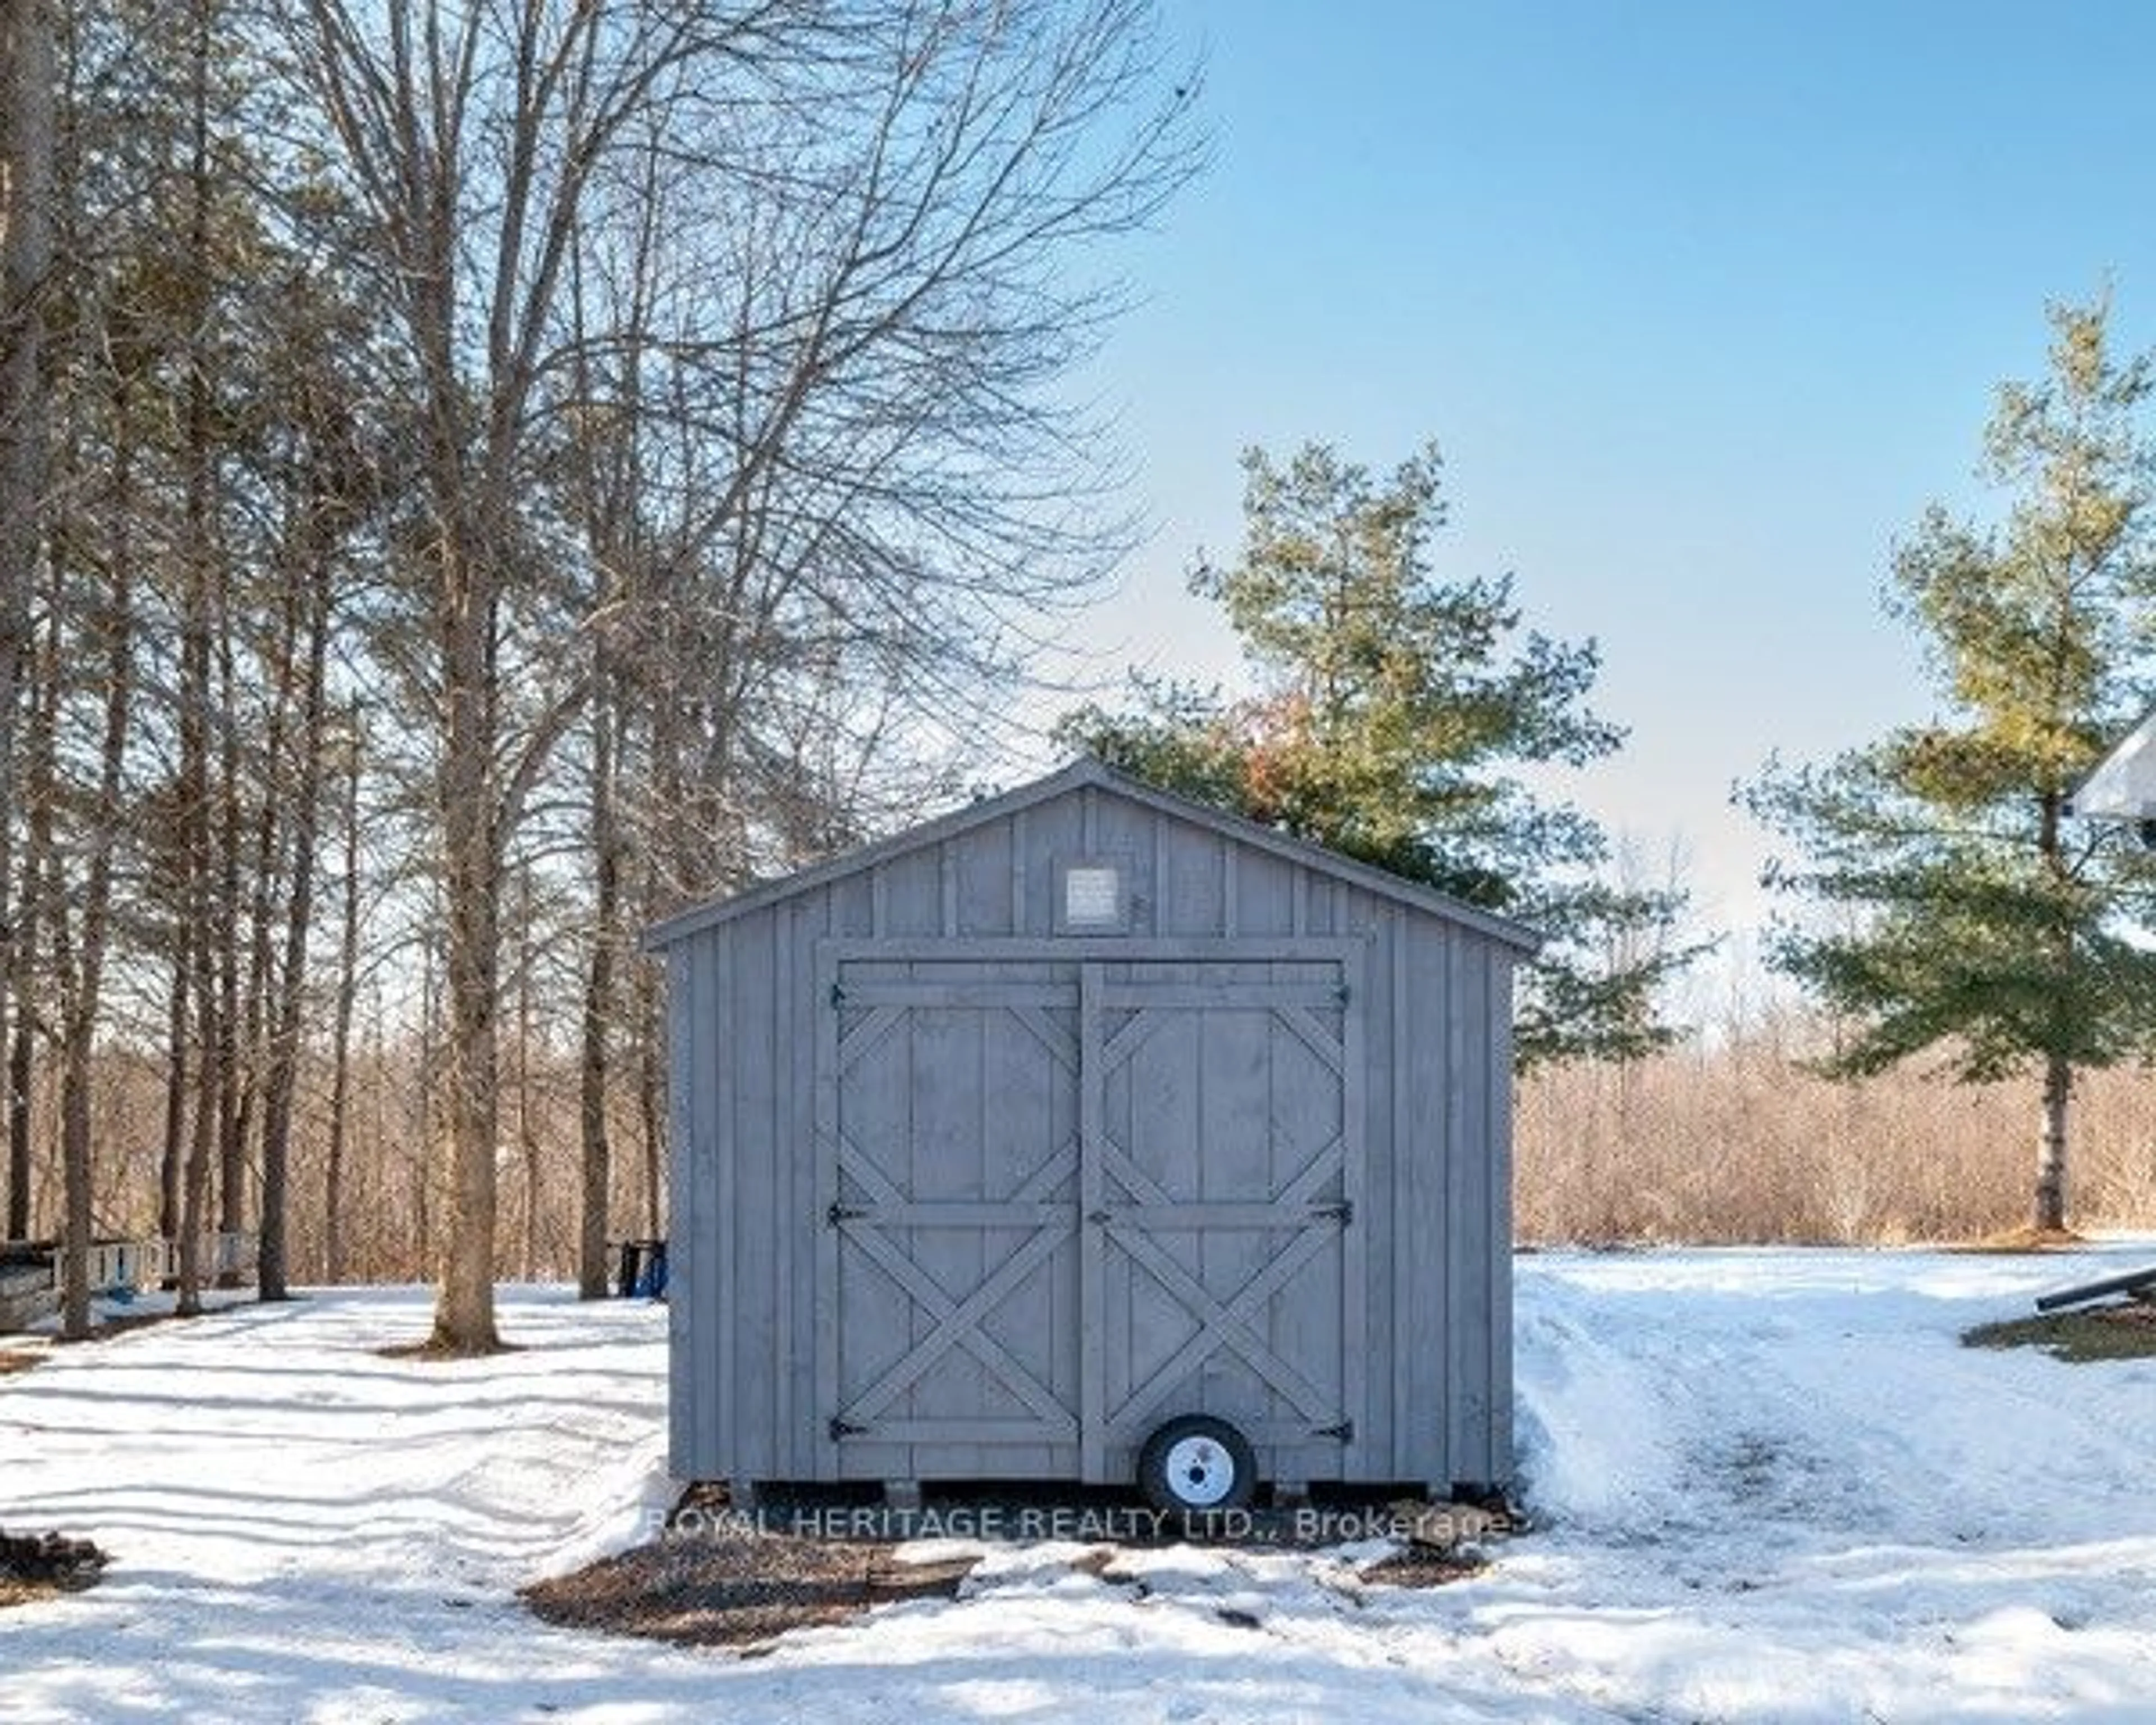 Shed for 3820 Scotch Line Rd, North Perth Ontario K7H 3C5